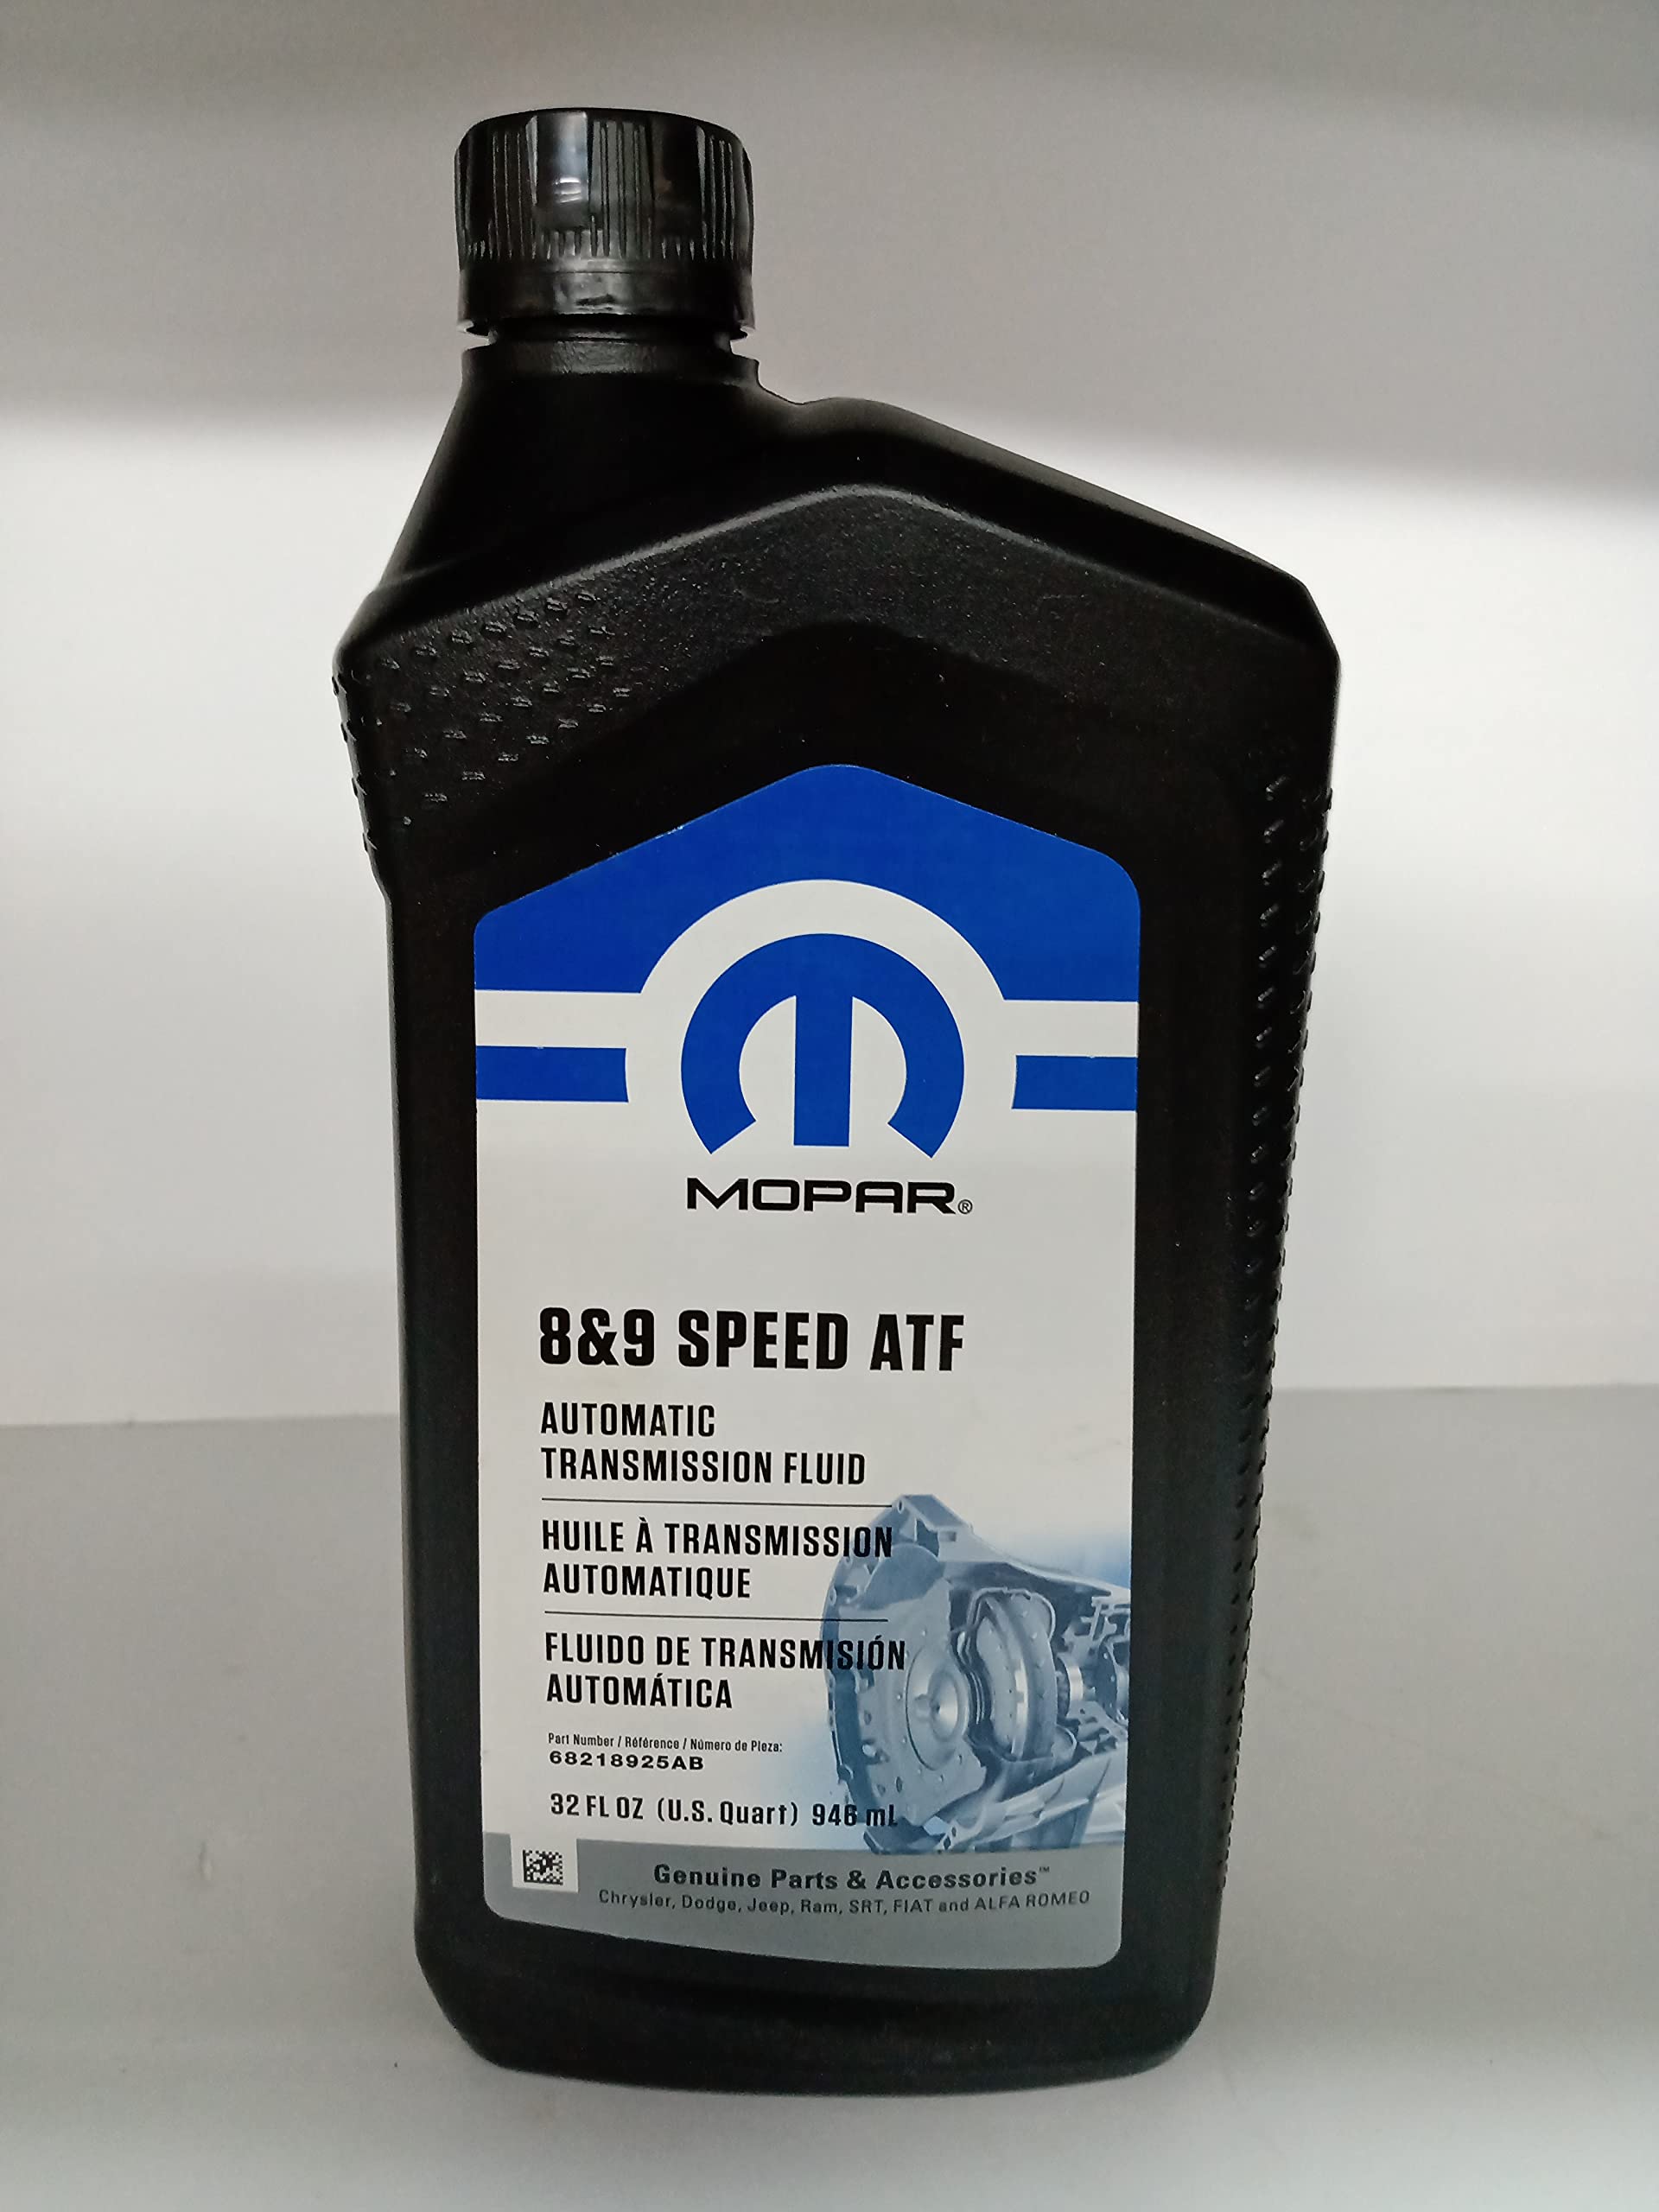 What Is Equivalent To Mopar Zf Fluid